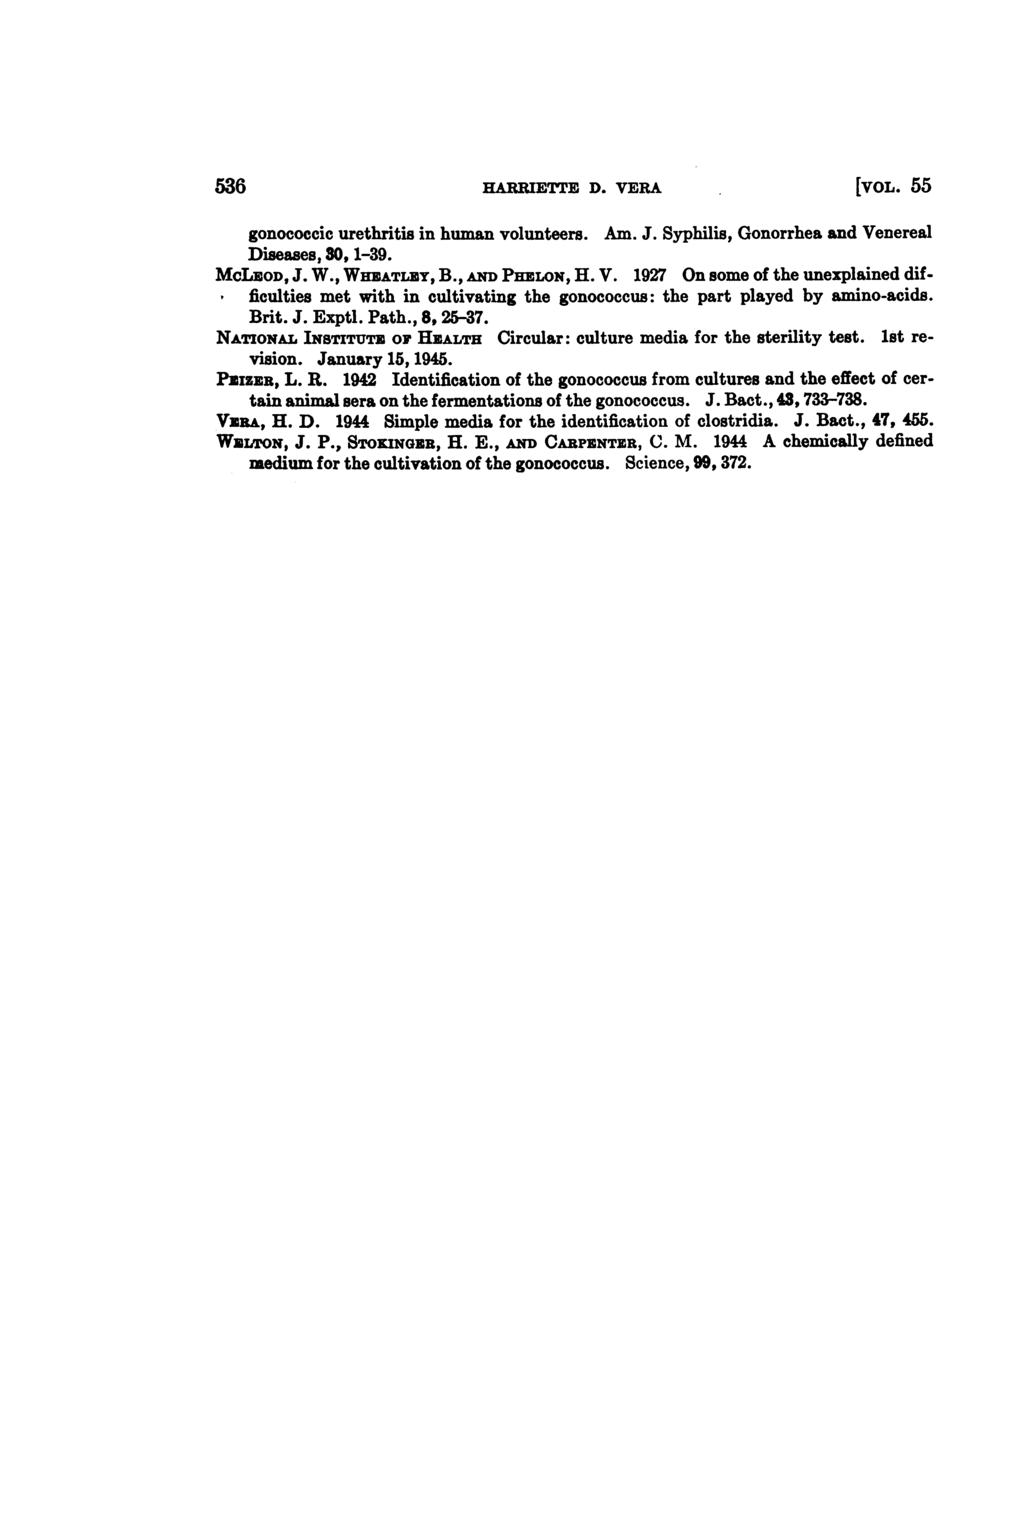 536 HARRIETFE D. VERA [VOL. 55 gonococcic urethritis in human volunteers. Am. J. Syphilis, Gonorrhea and Venereal Diseases, 30, 1-39. MCLEOD, J. W., WHEATLEY, B., AND PEILON, H. V. 1927 On some of the unexplained difficulties met with in cultivating the gonococcus: the part played by amino-acids.